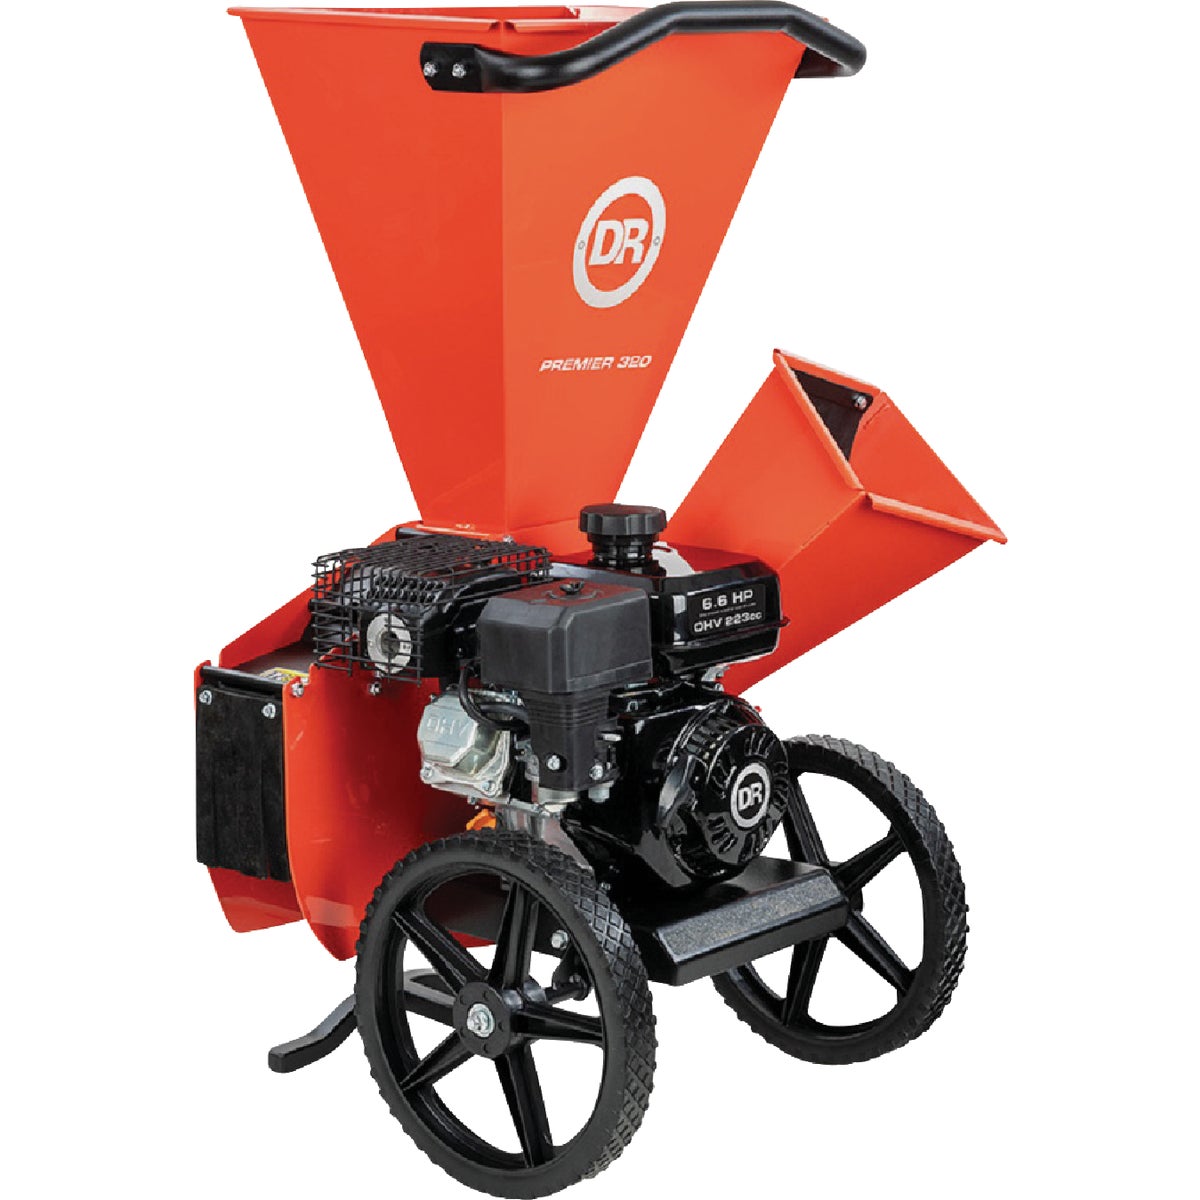 Item 705380, Chipper/shredder that is a sturdy and highly maneuverable workhorse.